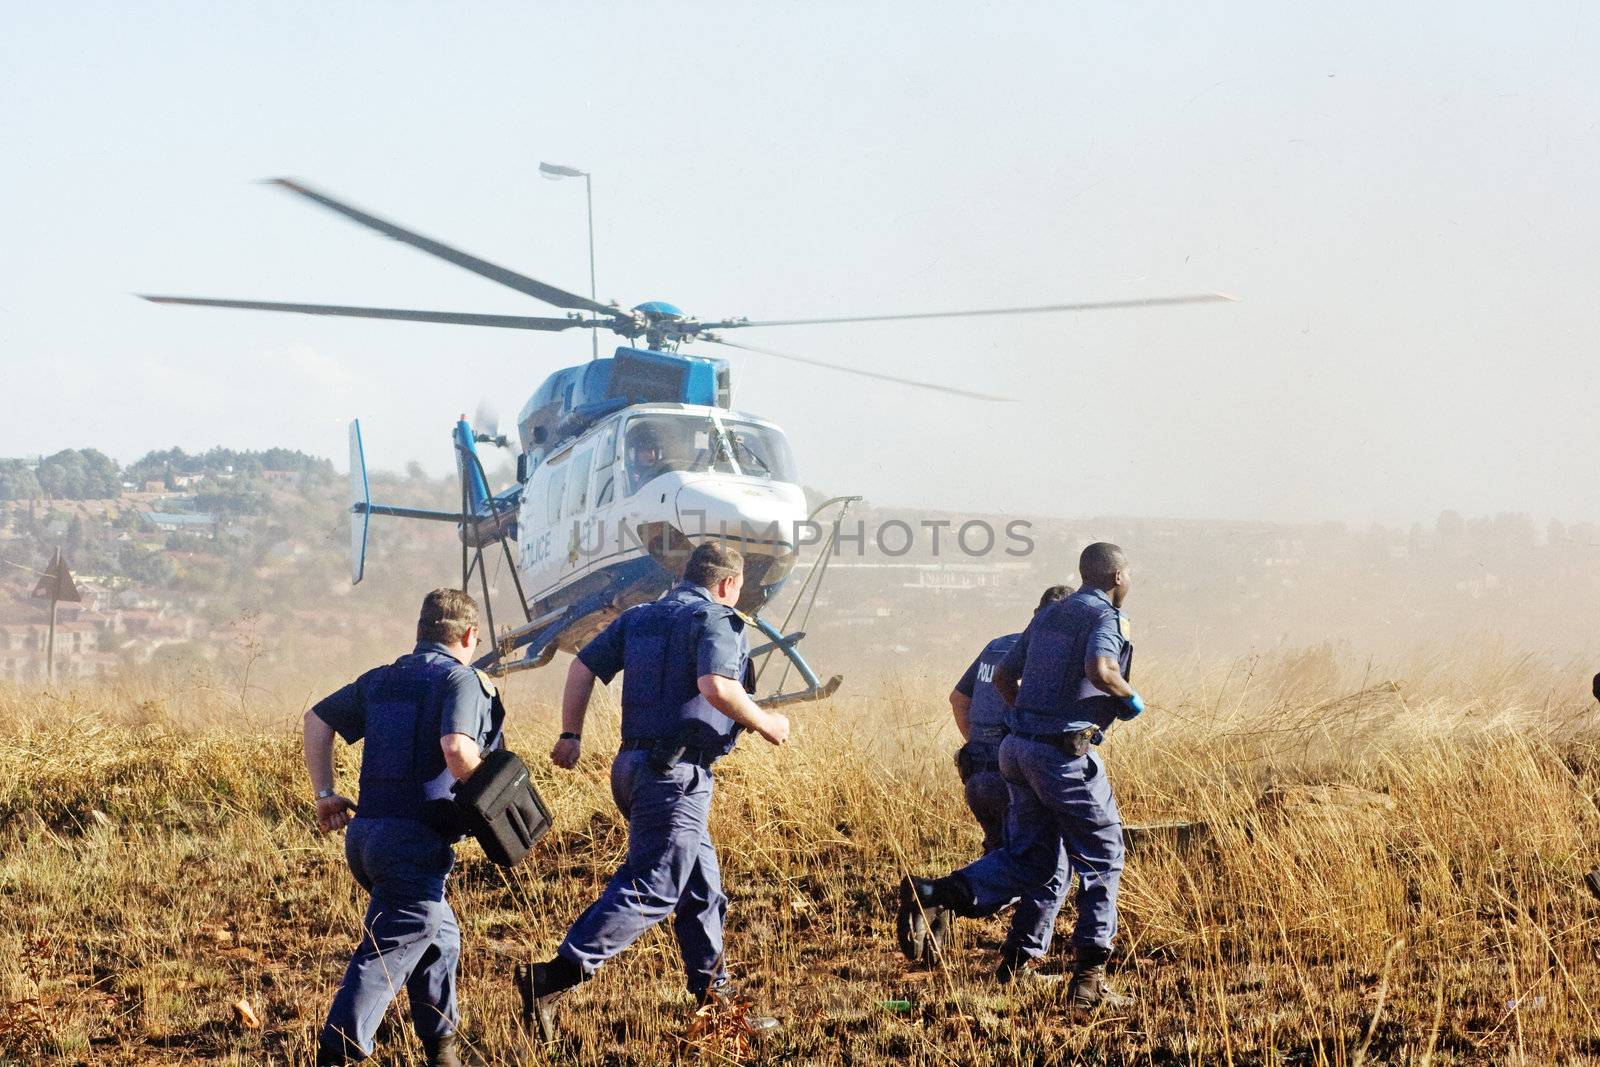 South African Police members and helicopter.